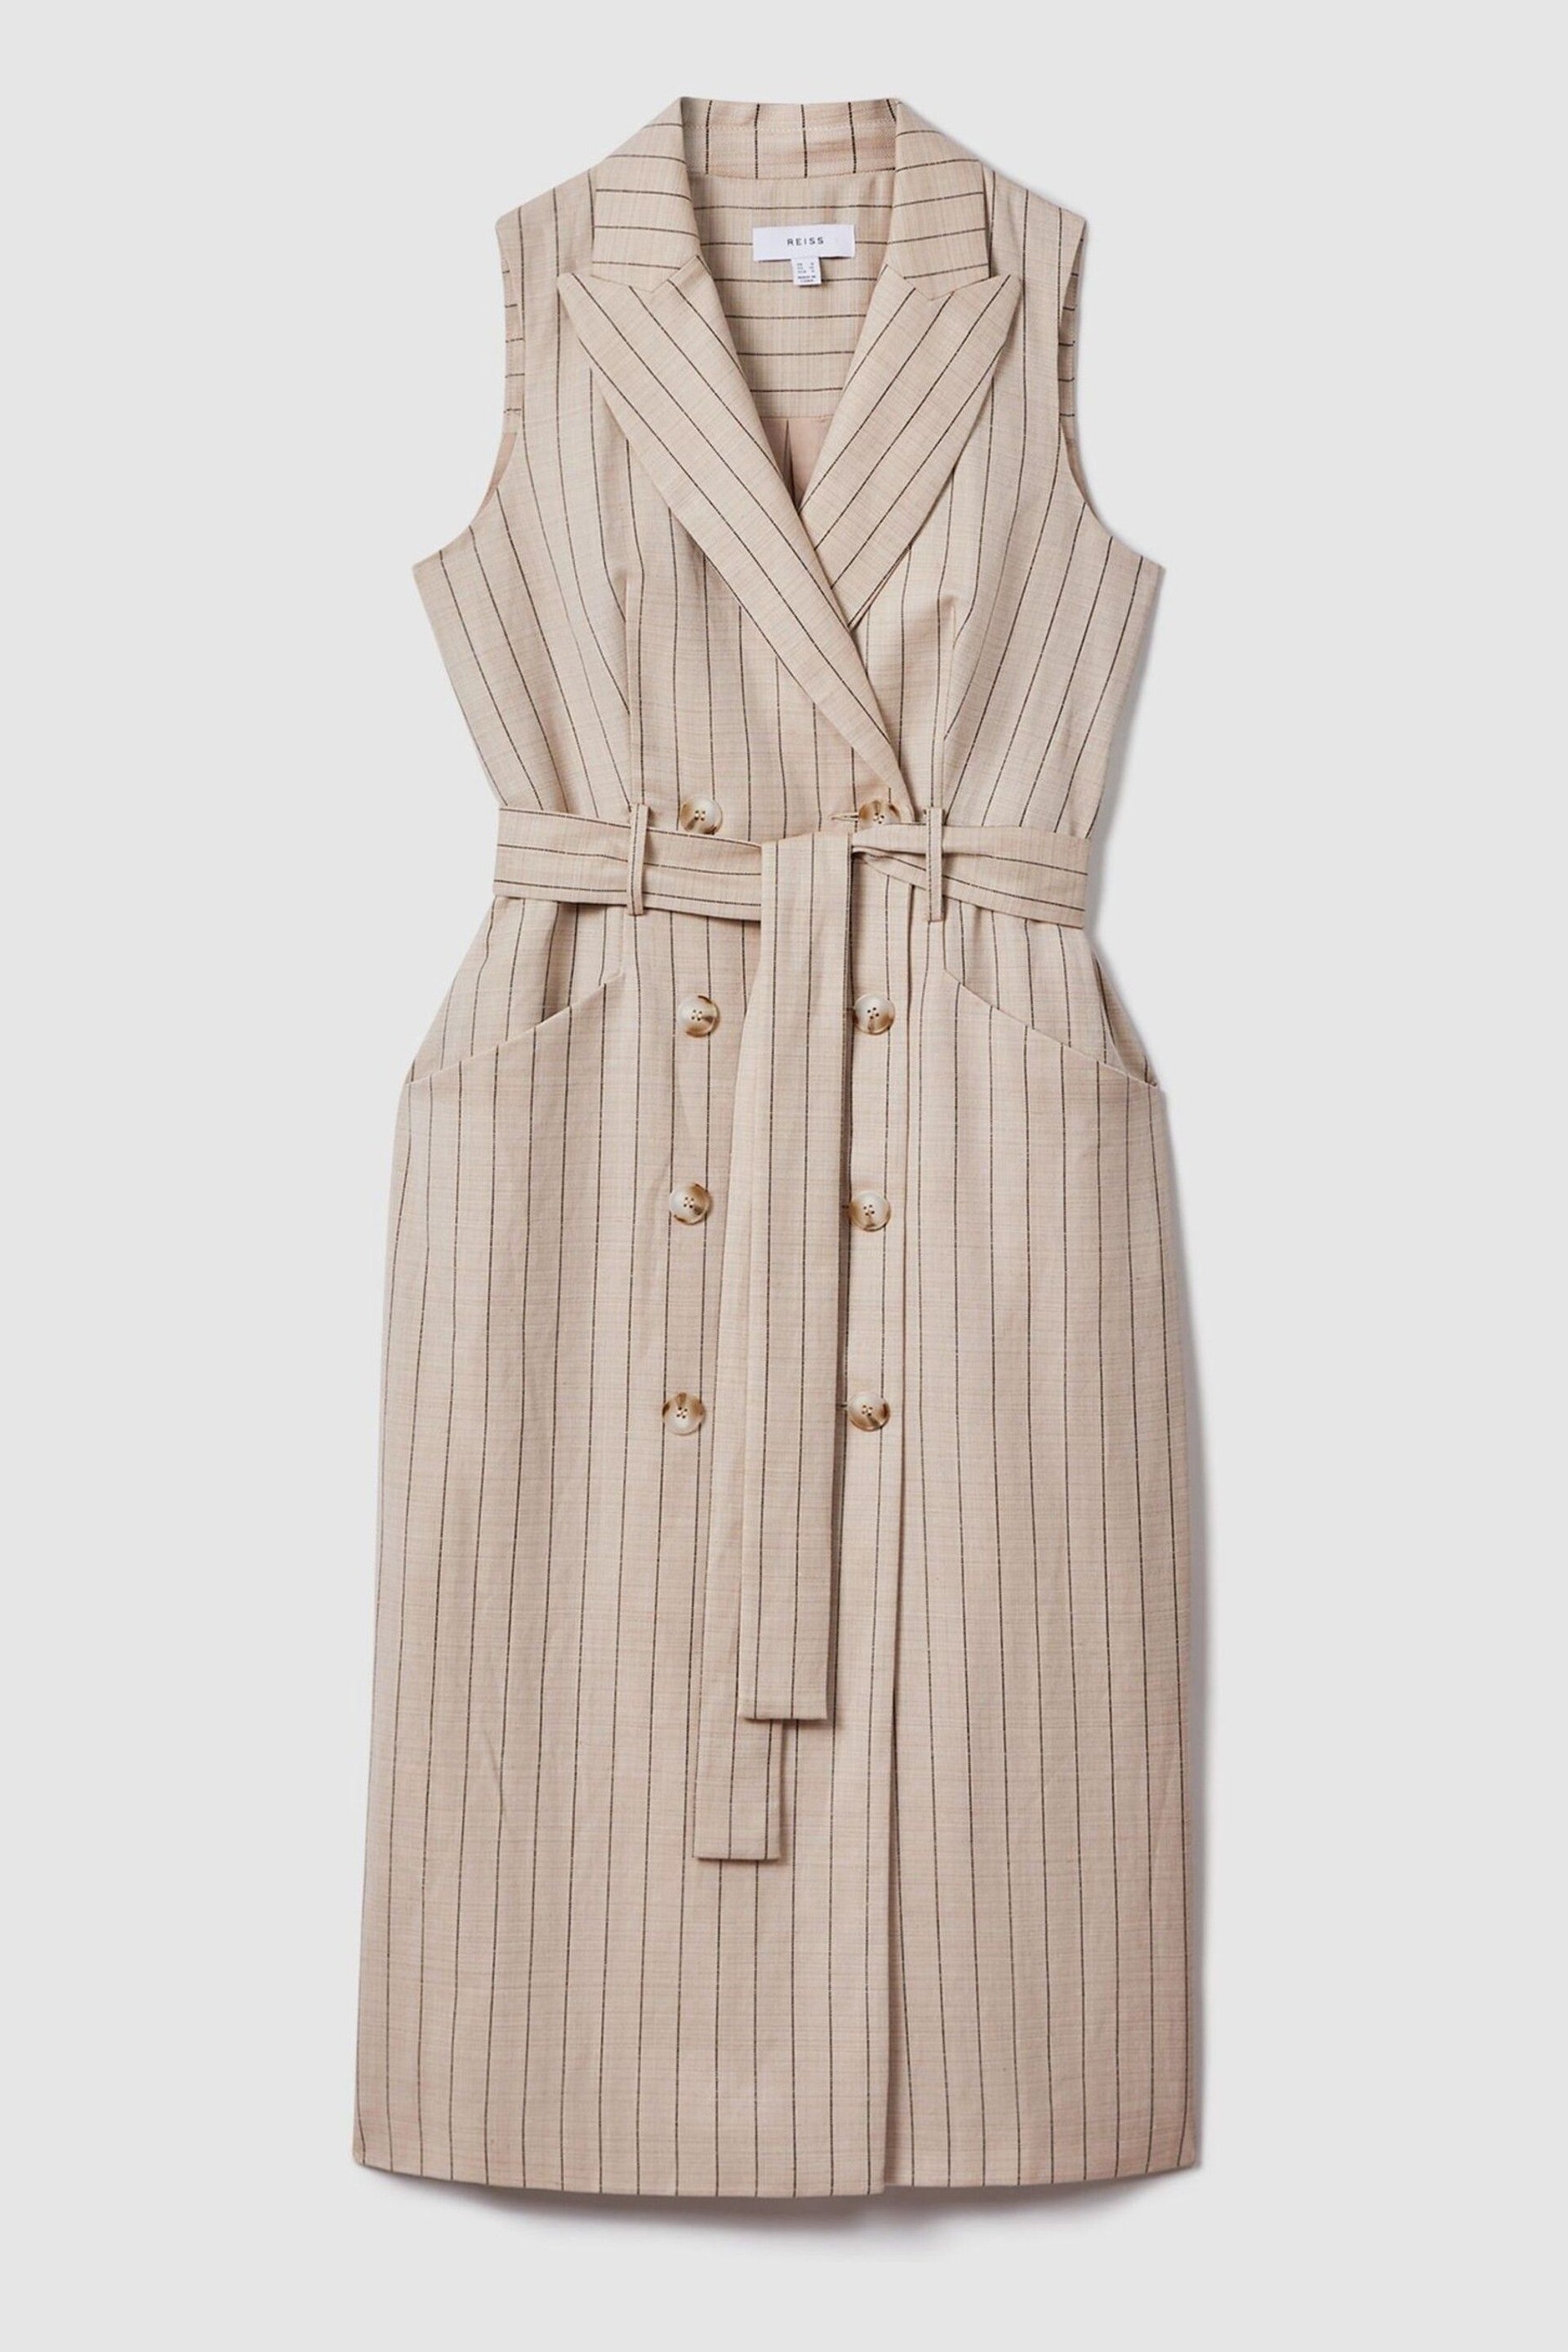 Reiss Neutral Andie Wool Blend Striped Double Breasted Midi Dress - Image 2 of 5